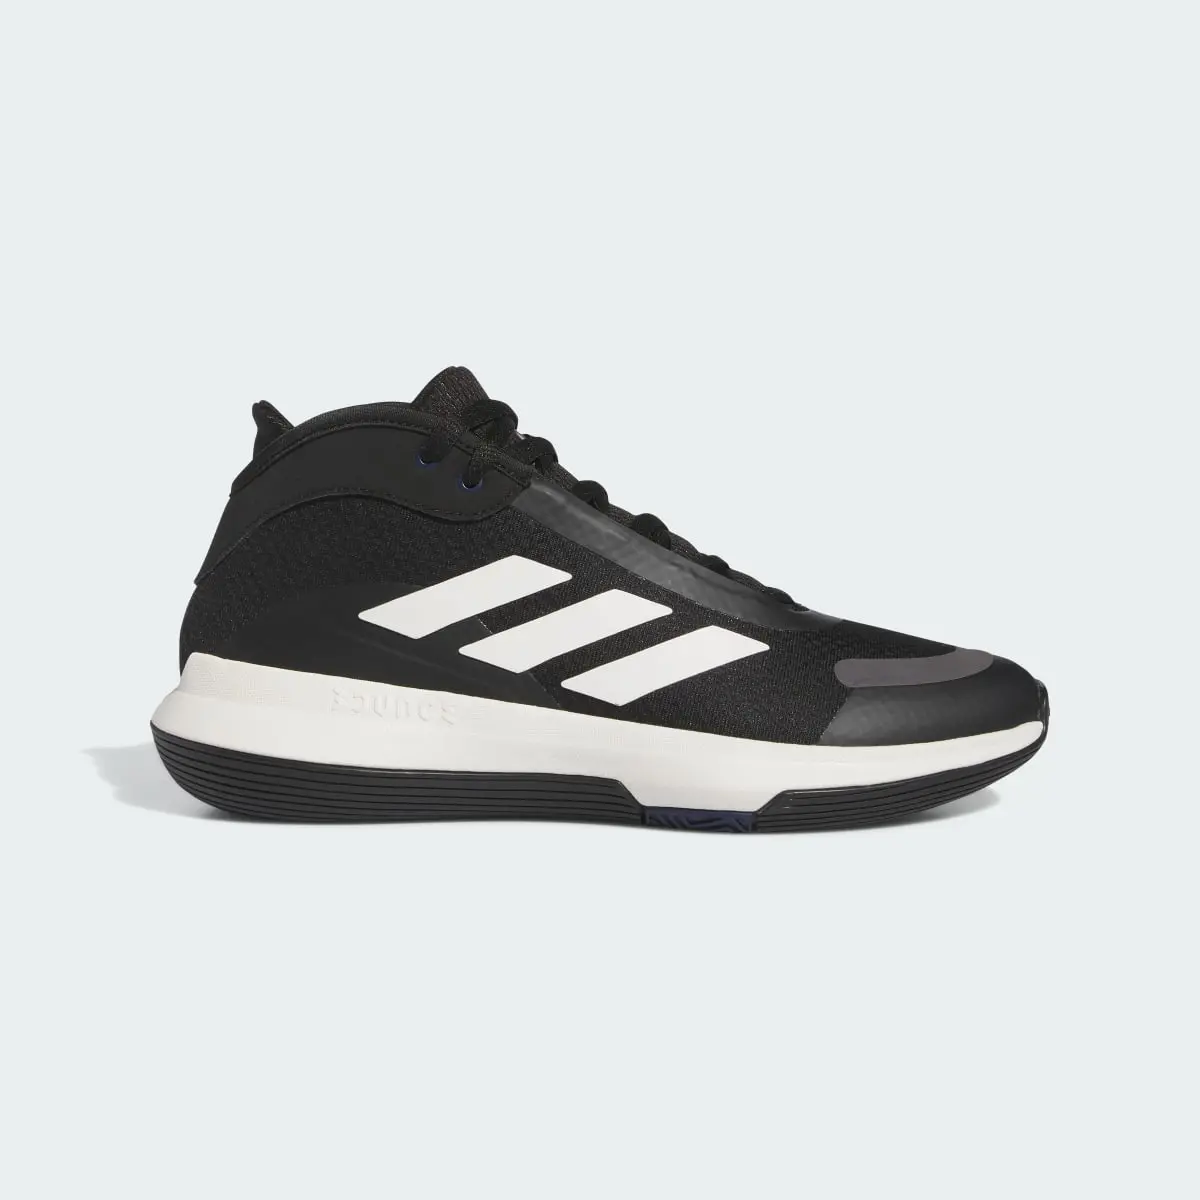 Adidas Bounce Legends Low Basketball Shoes. 2